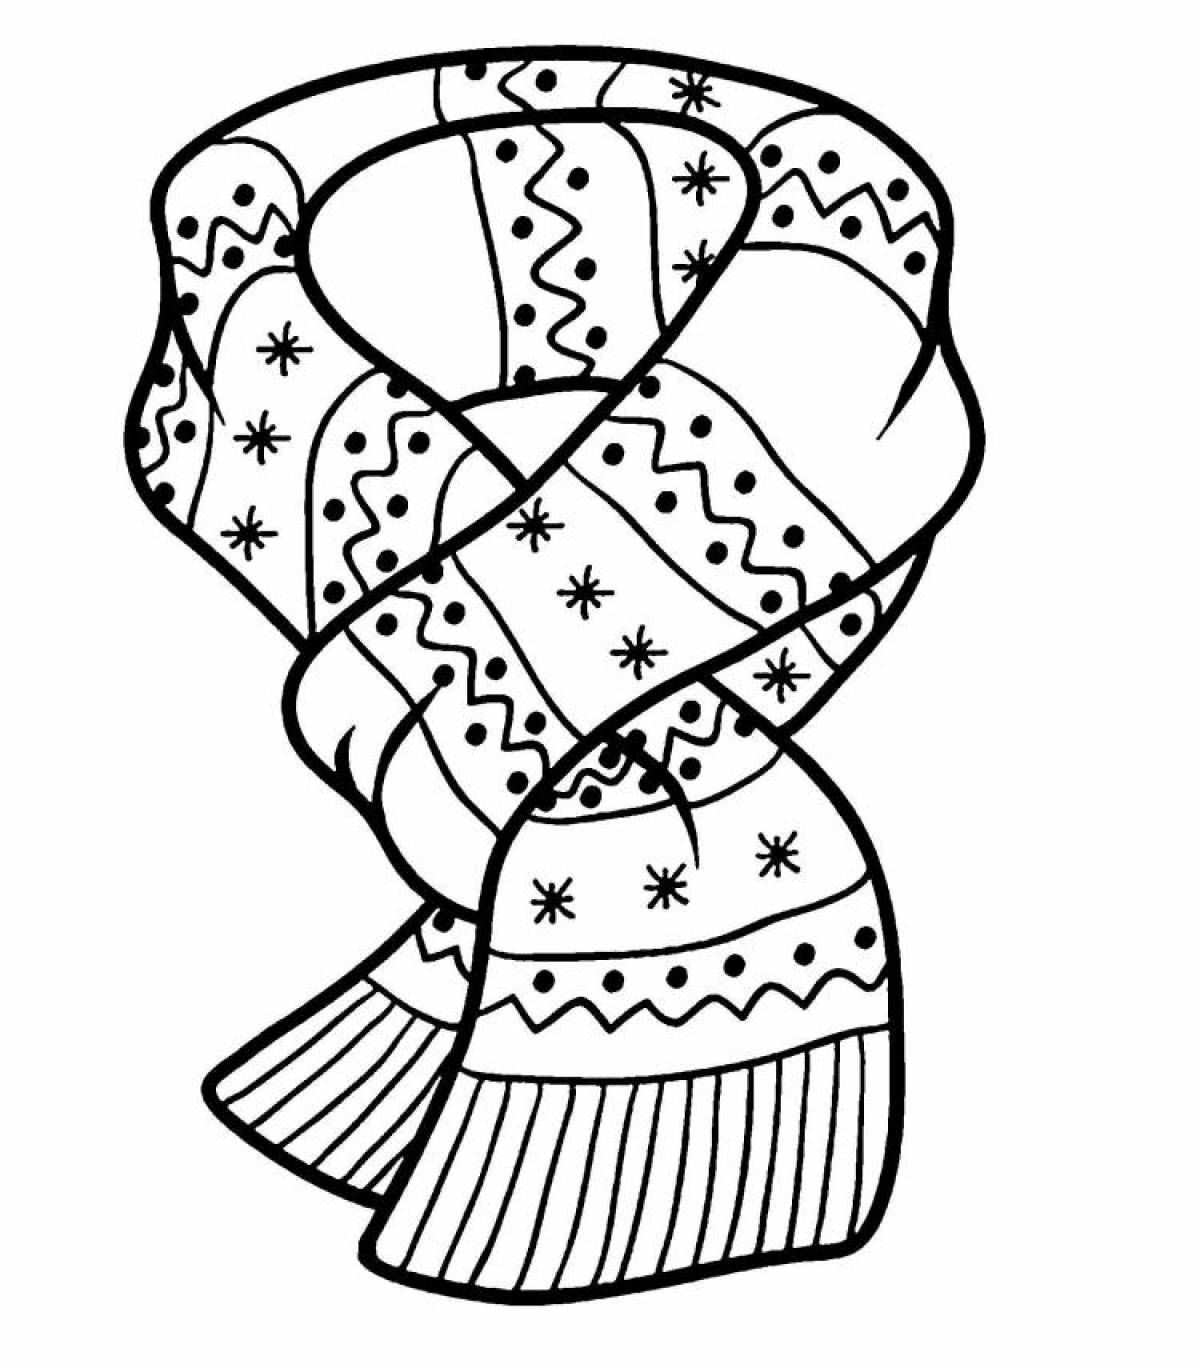 Animated coloring page of scarves for kids